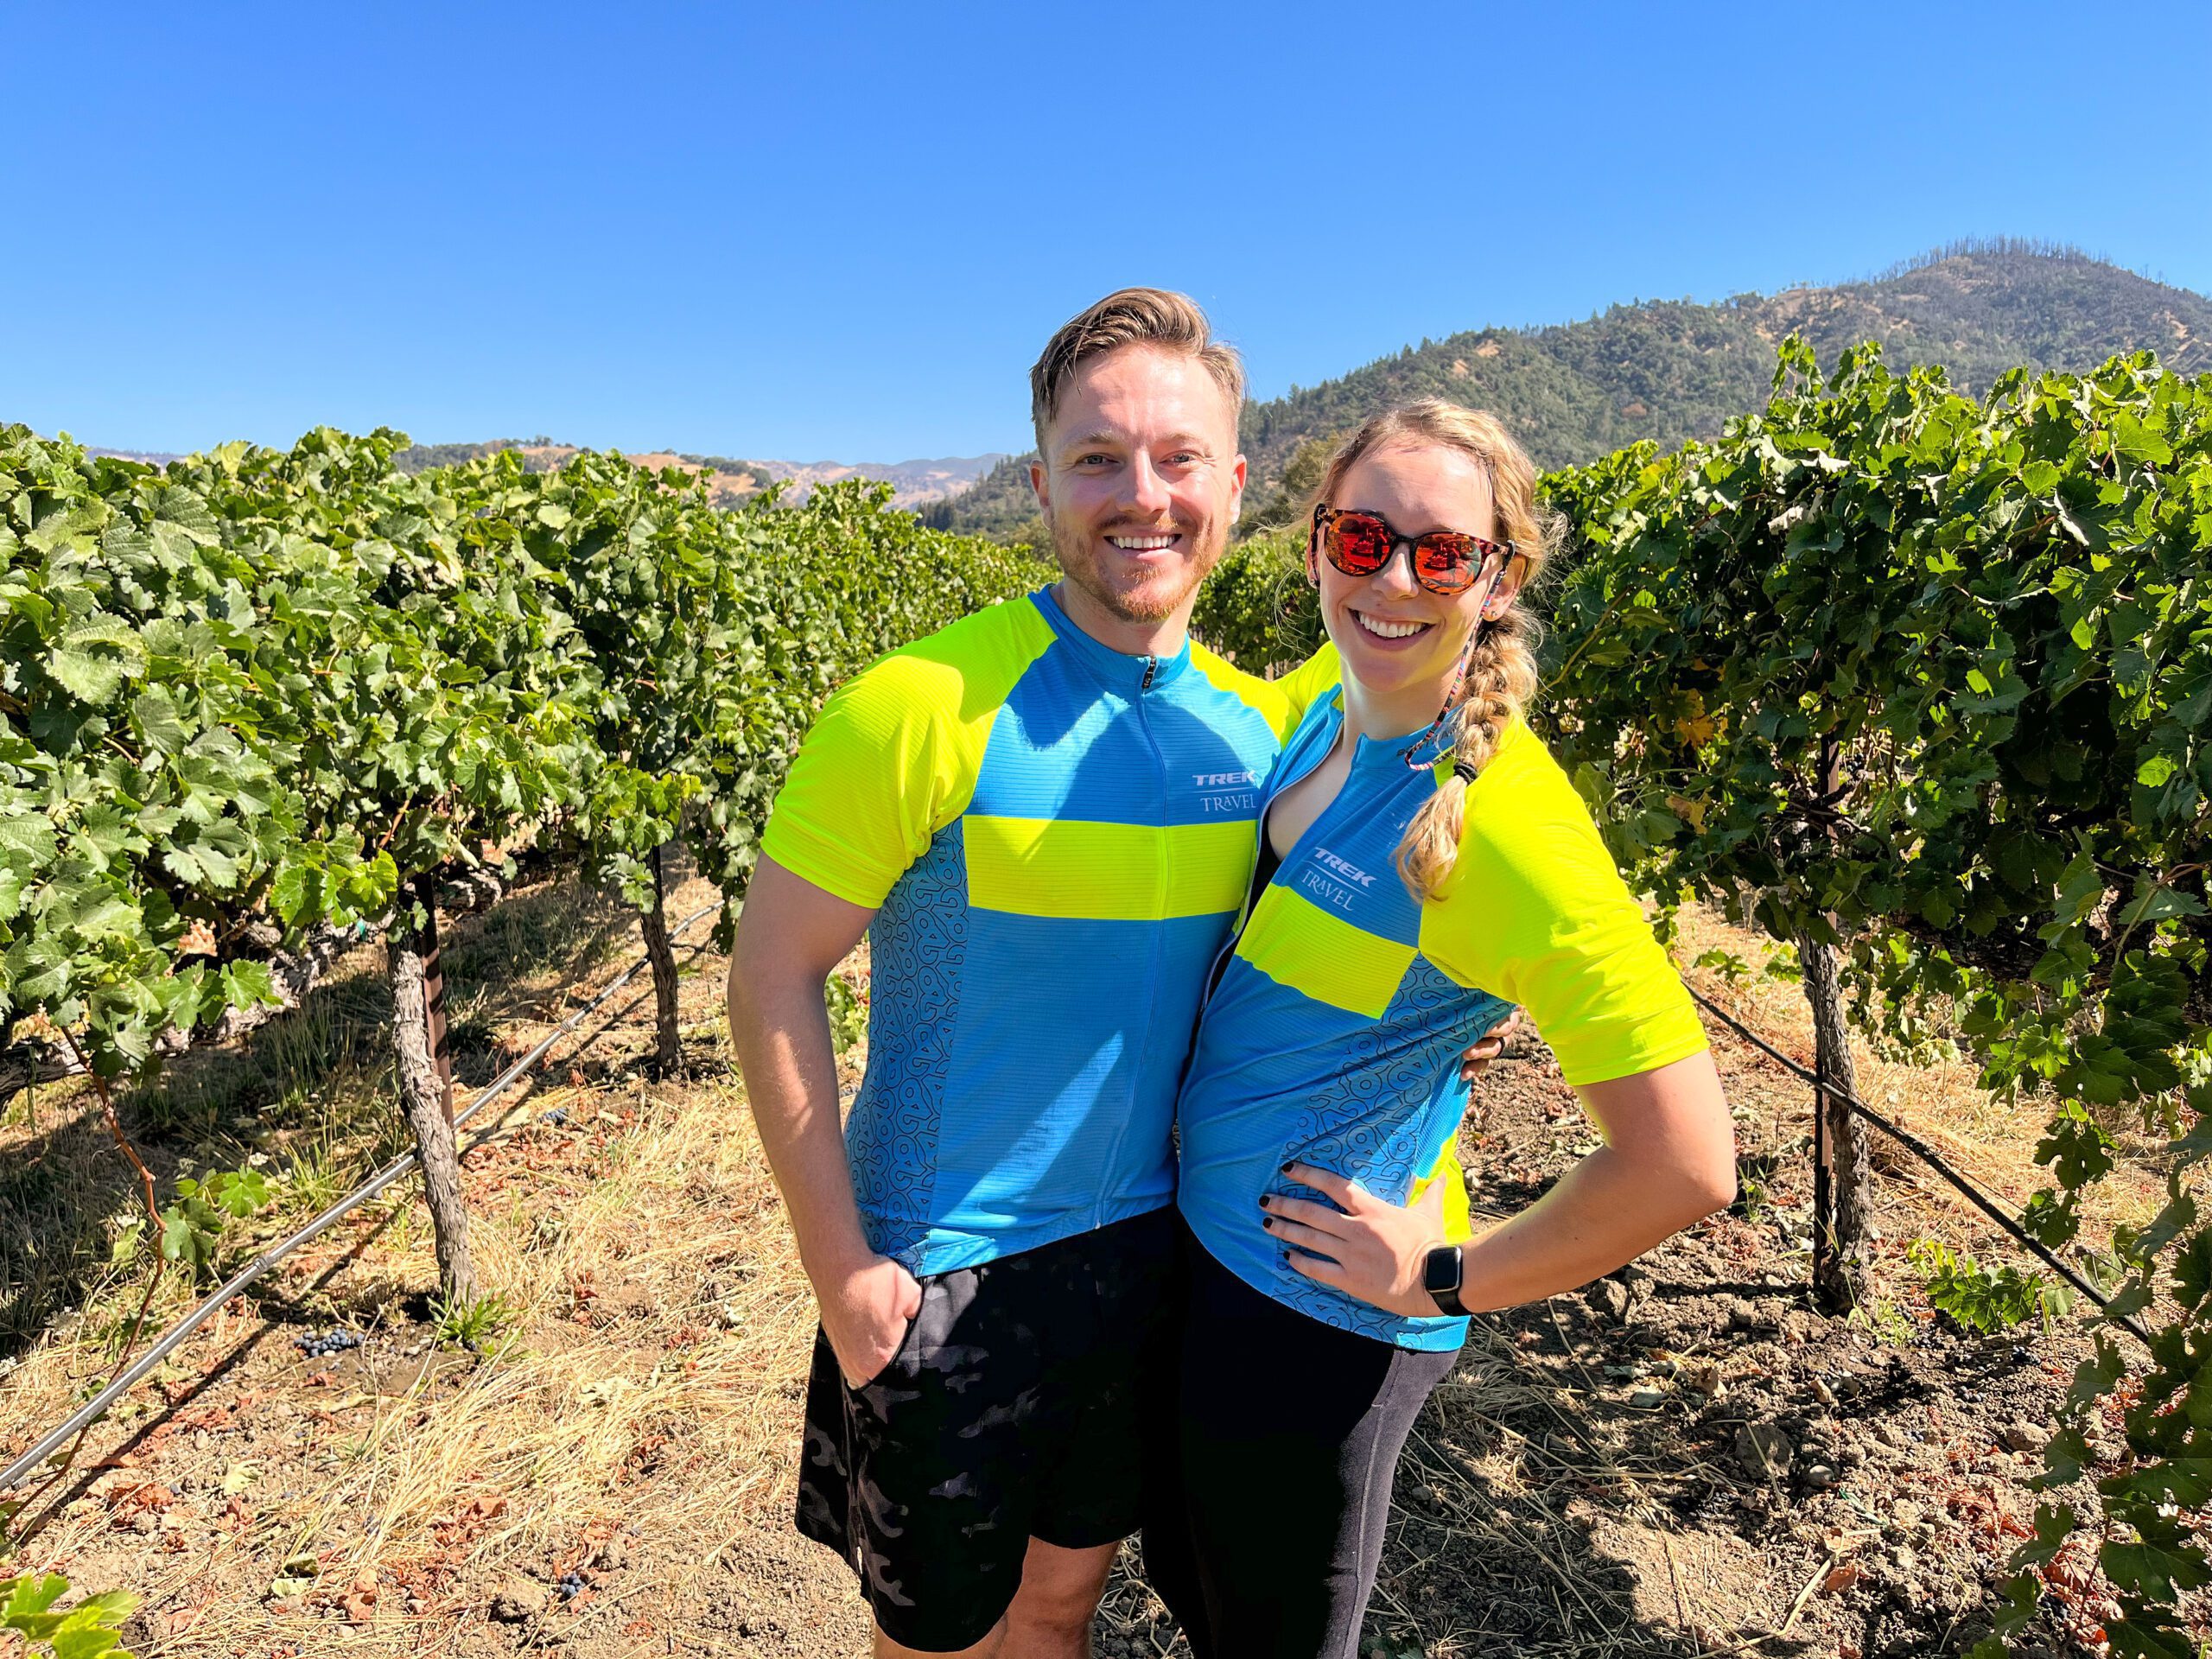 Two people visiting a vineyard in California